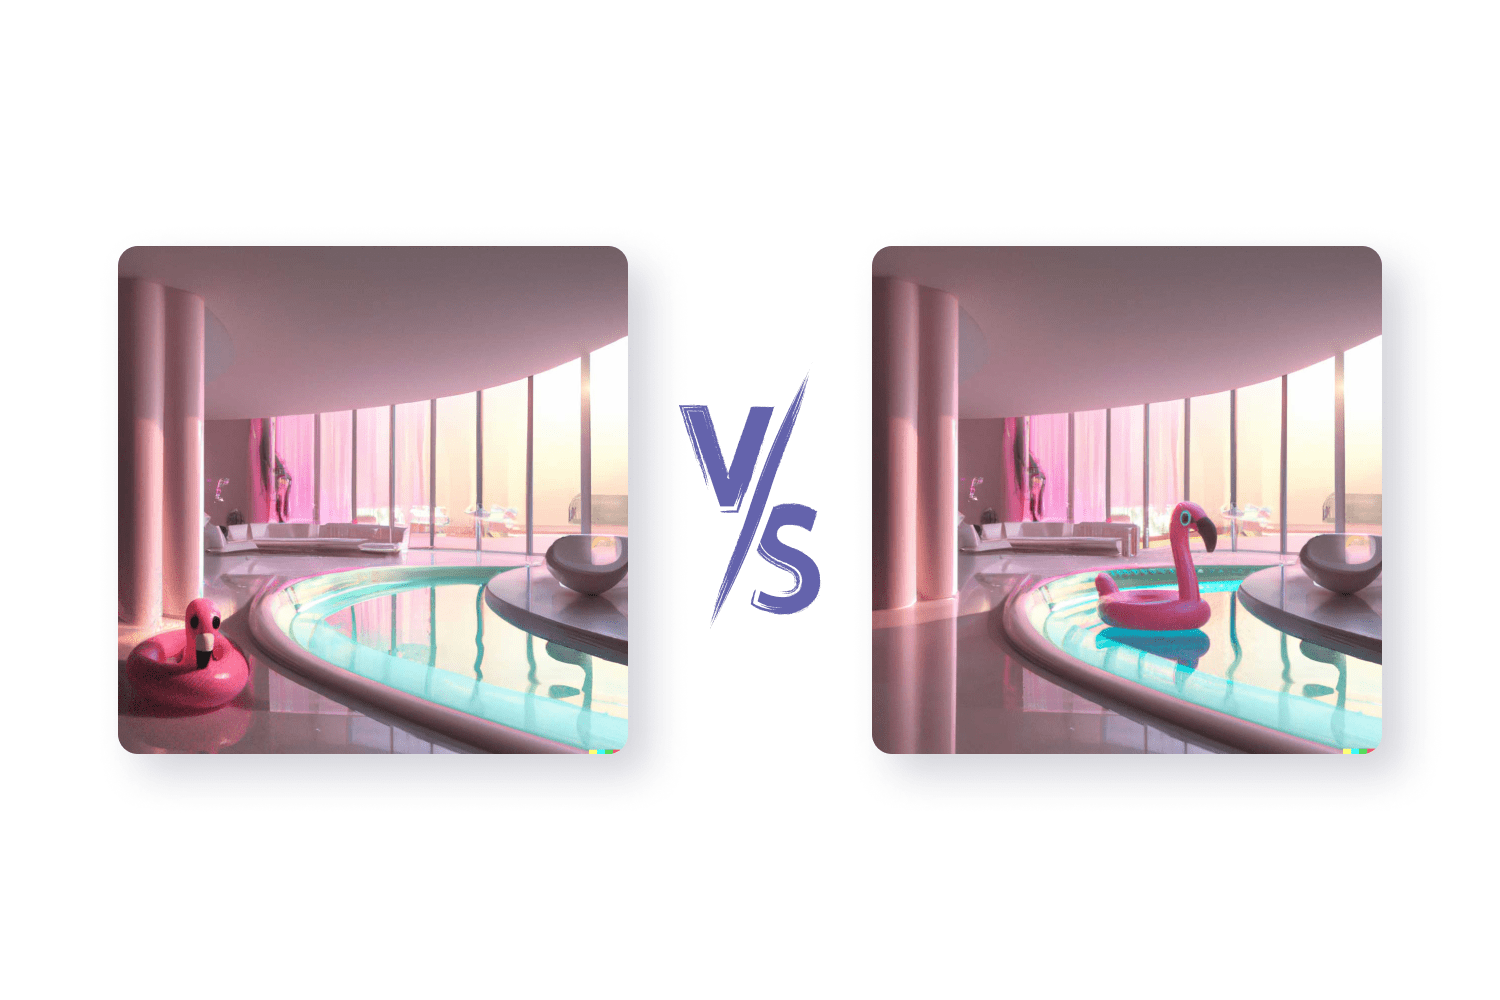 Two images with interior feature a flamingo pool float drawn in different shapes, reflections, and at different angles.